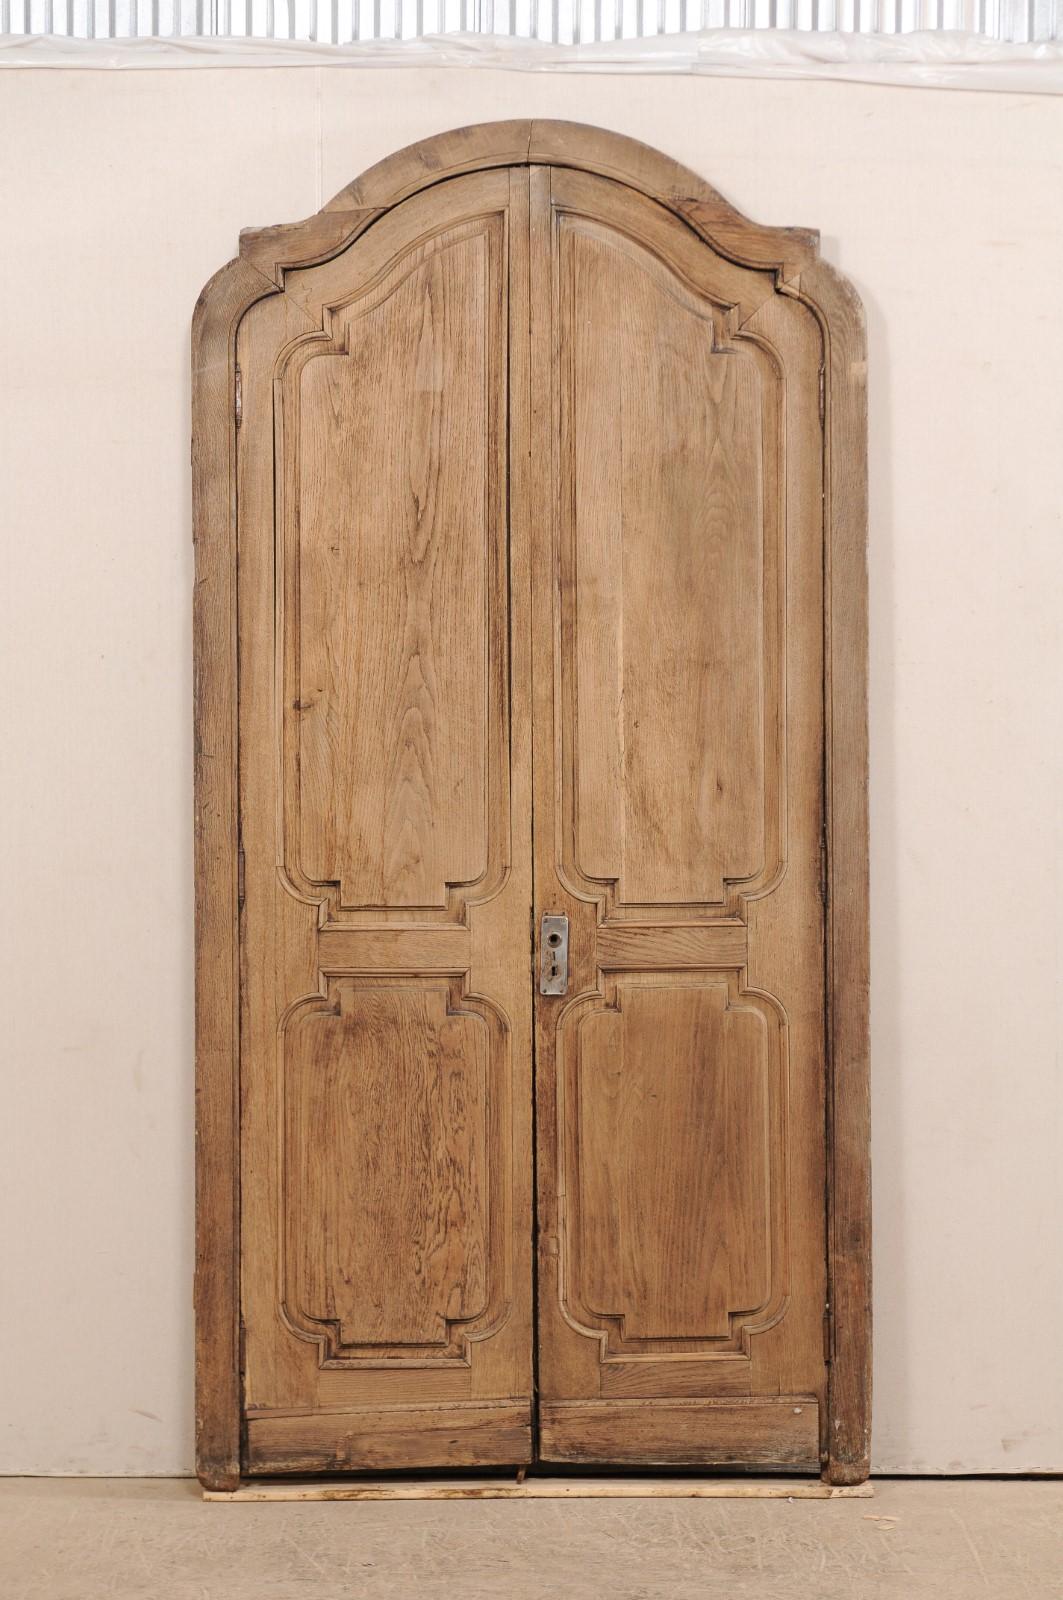 An exquisite pair of Spanish arched double doors with their original casing from the 19th century. This fabulous piece consists of two antique Spanish doors with their original casing. The surround or casing has a depressed arch pediment with eared